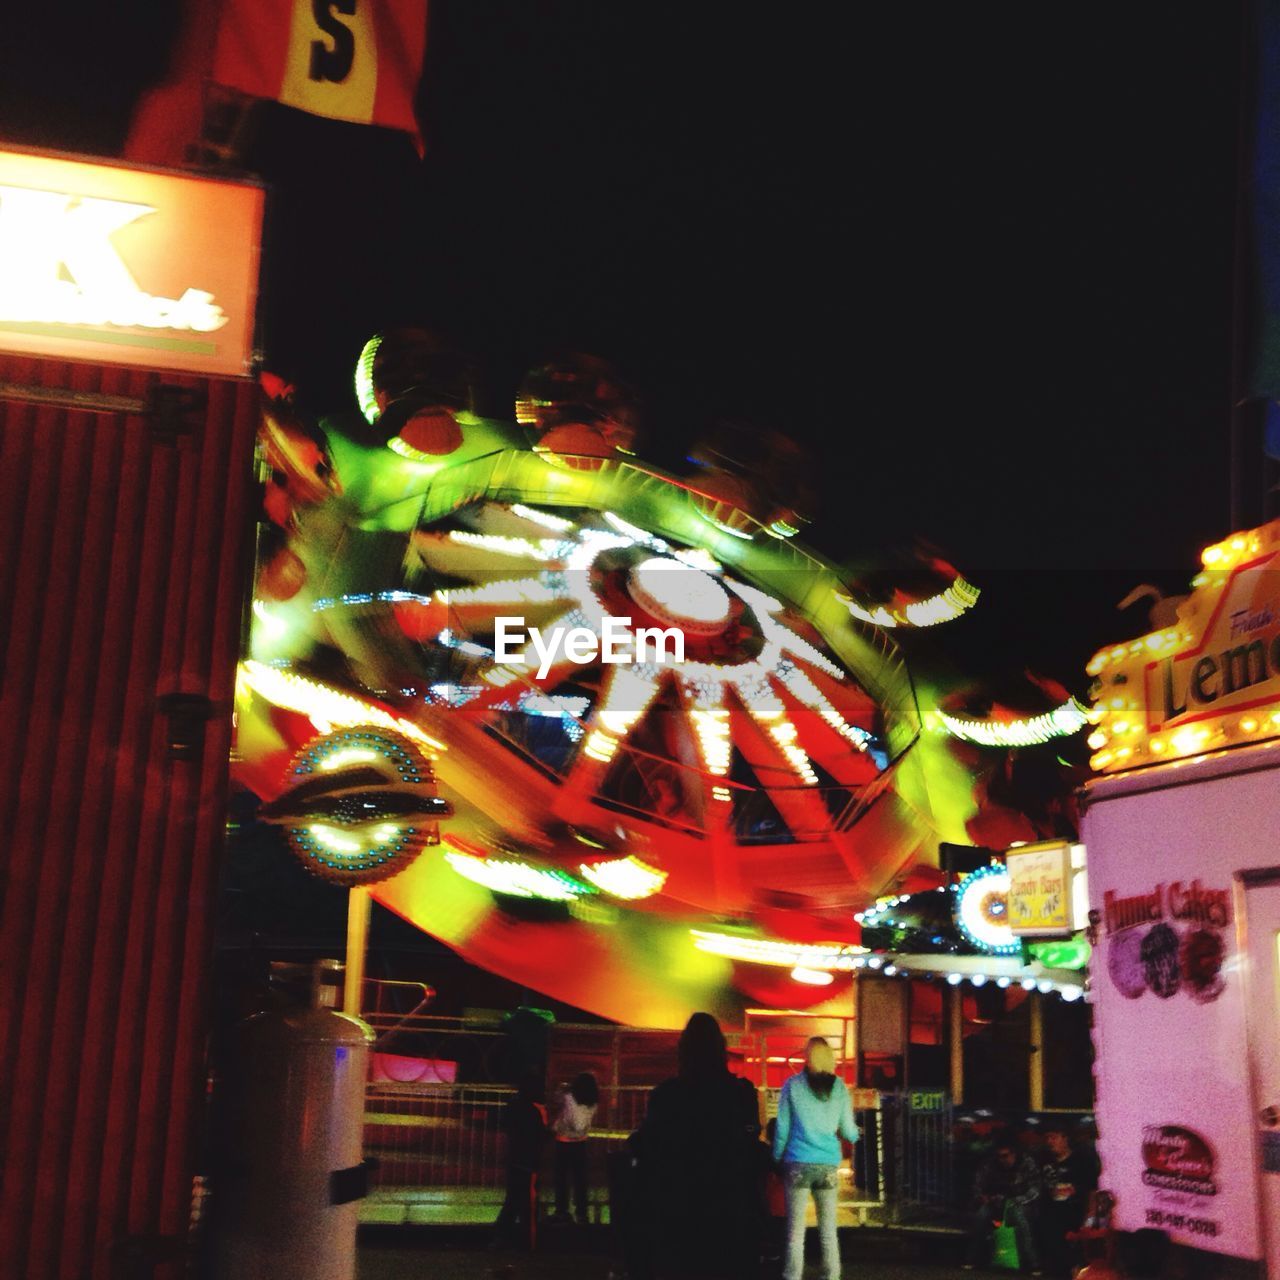 People against spinning amusement park ride at night